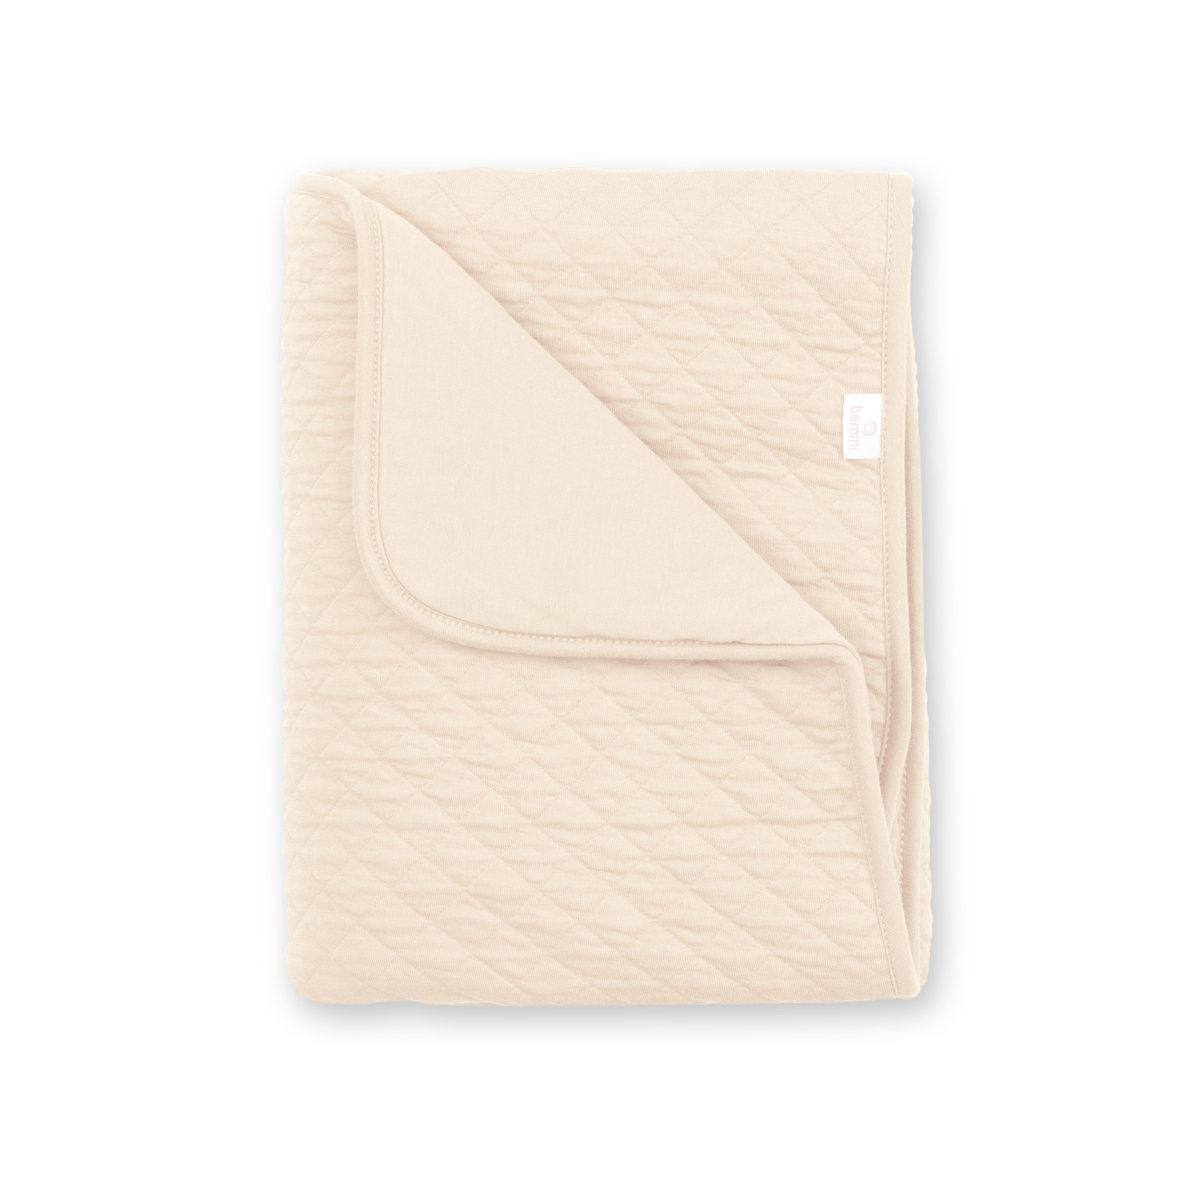 Manta Pady quilted + jersey 75x100cm QUILT Cream tog 3